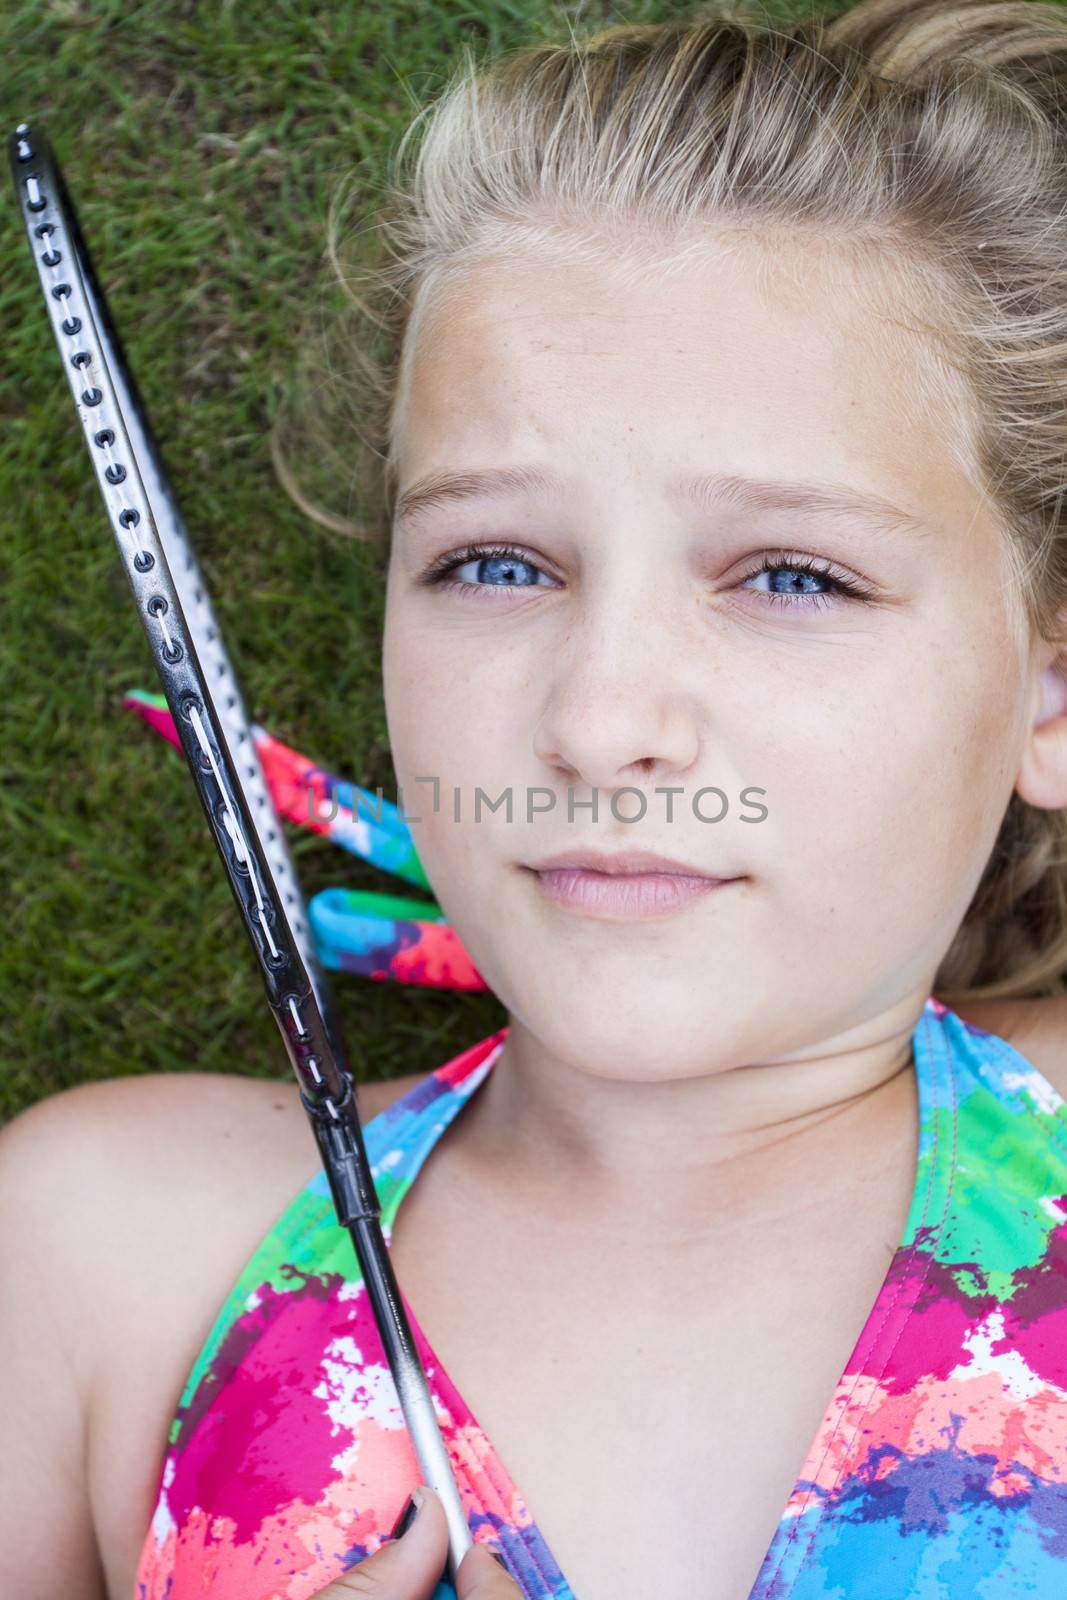 A teenage girl lying on the lawn outside looking at camera, holding a badminton racket in front of her face